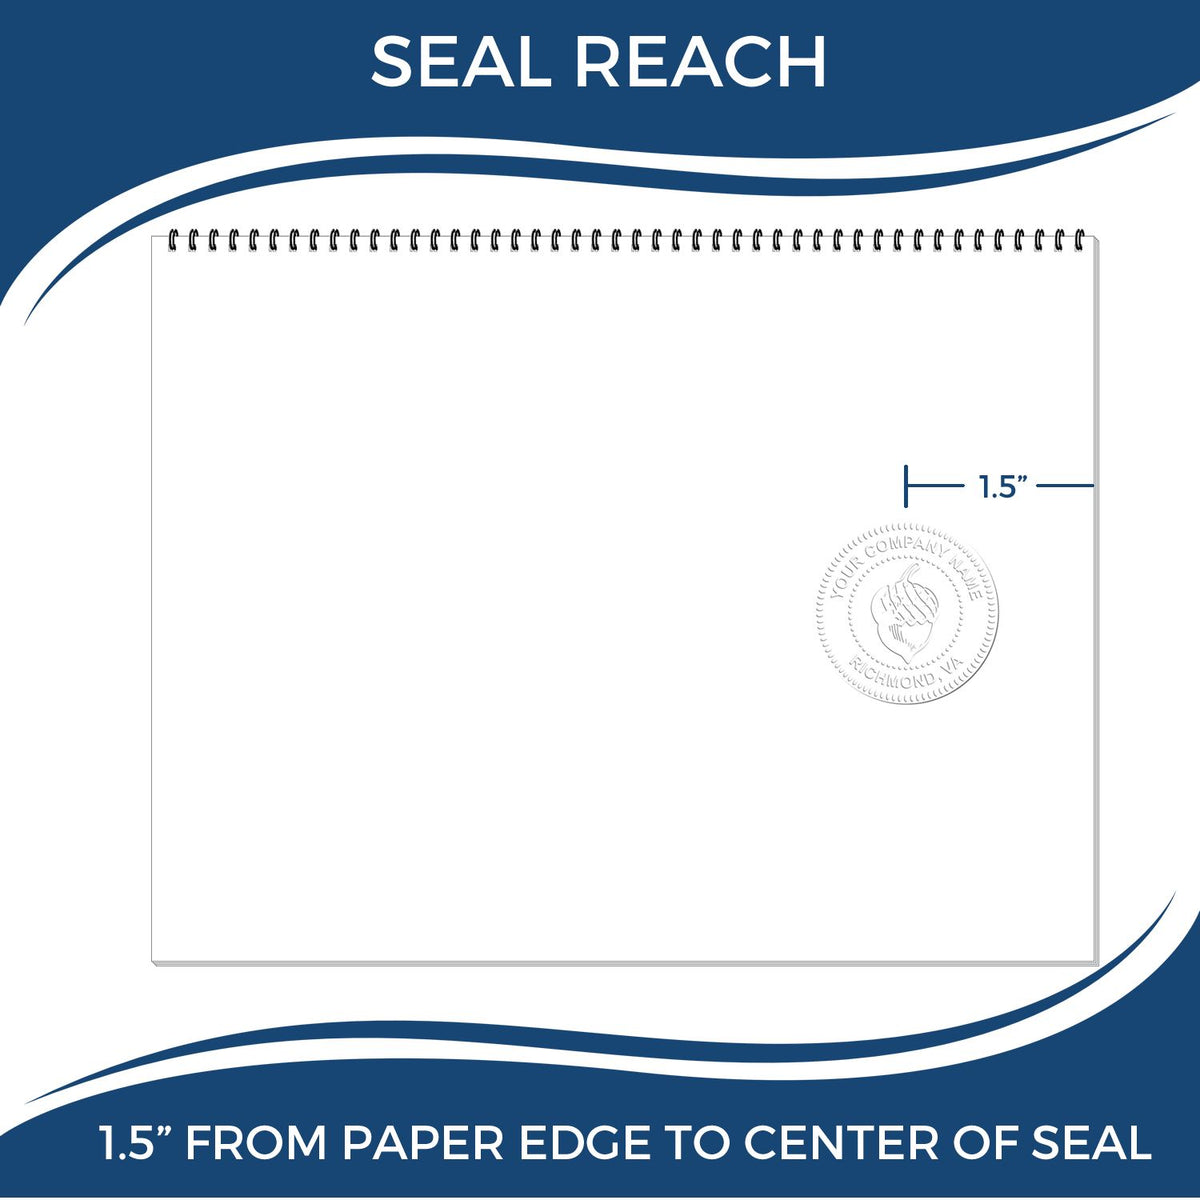 An infographic showing the seal reach which is represented by a ruler and a miniature seal image of the Hybrid New York Geologist Seal